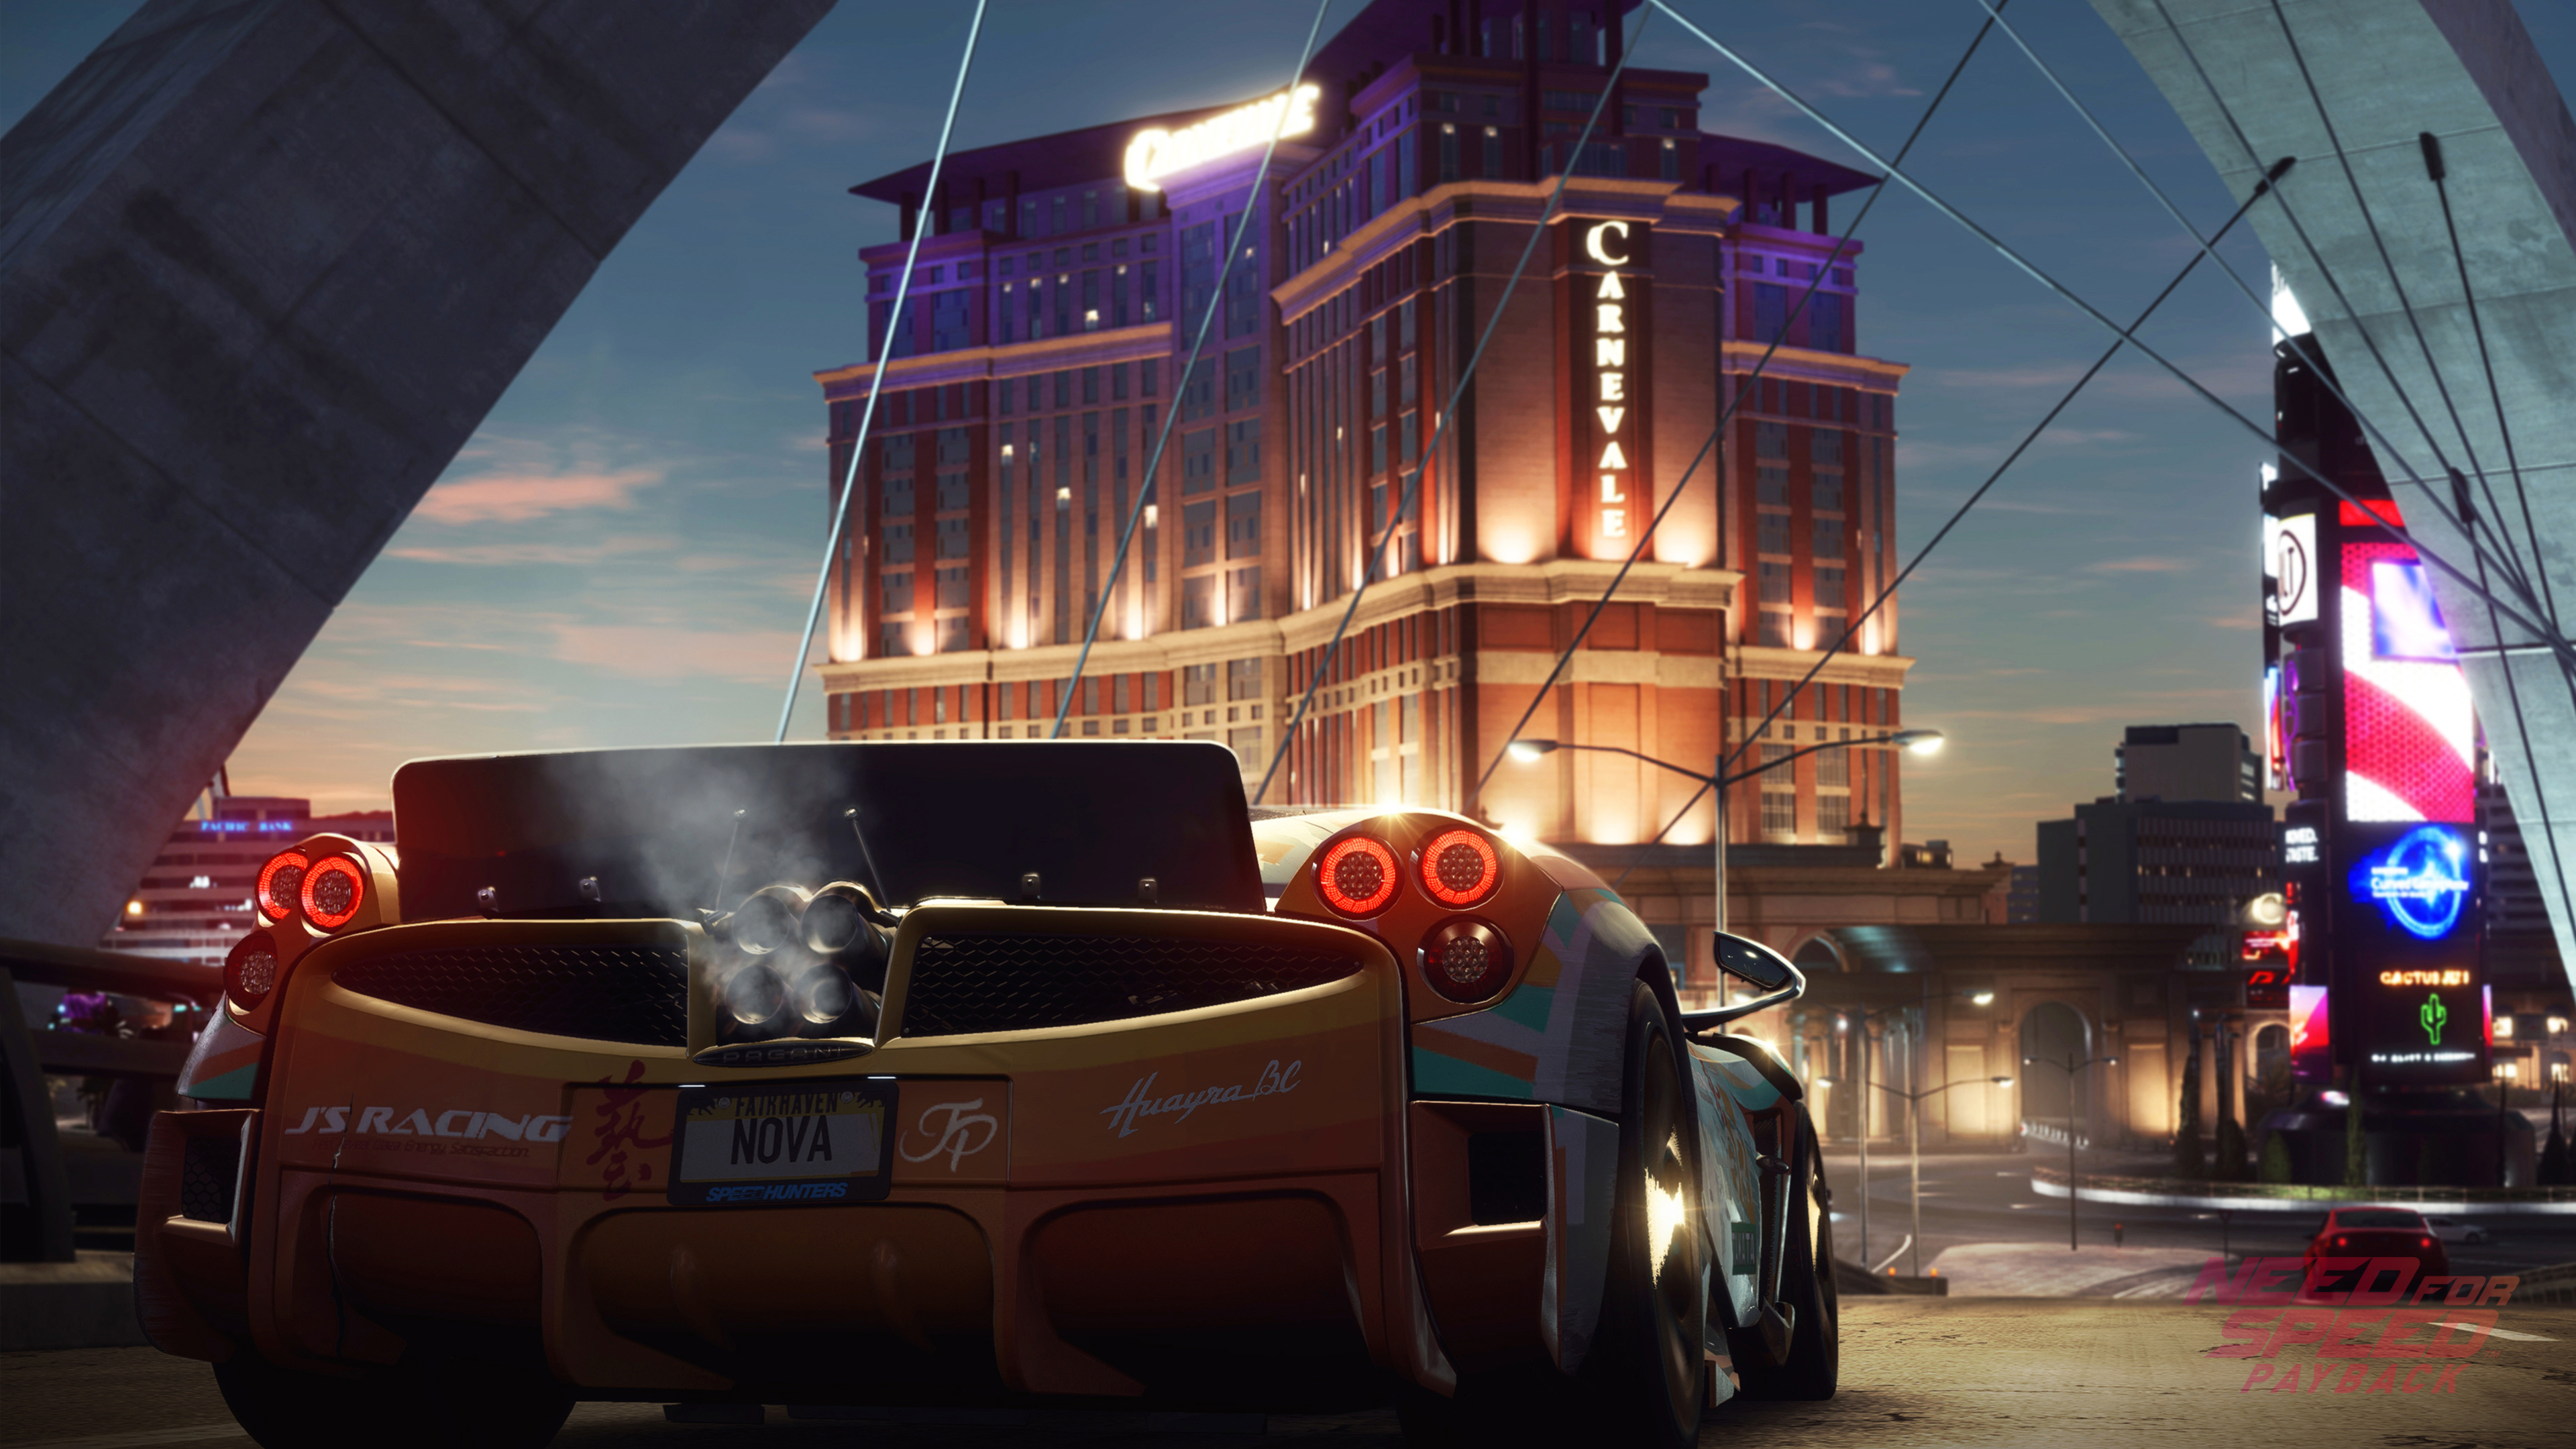 3840x2160 Need For Speed Payback Pc 17 4k Wallpaper Hd Games 4k Wallpapers Images Photos And Background